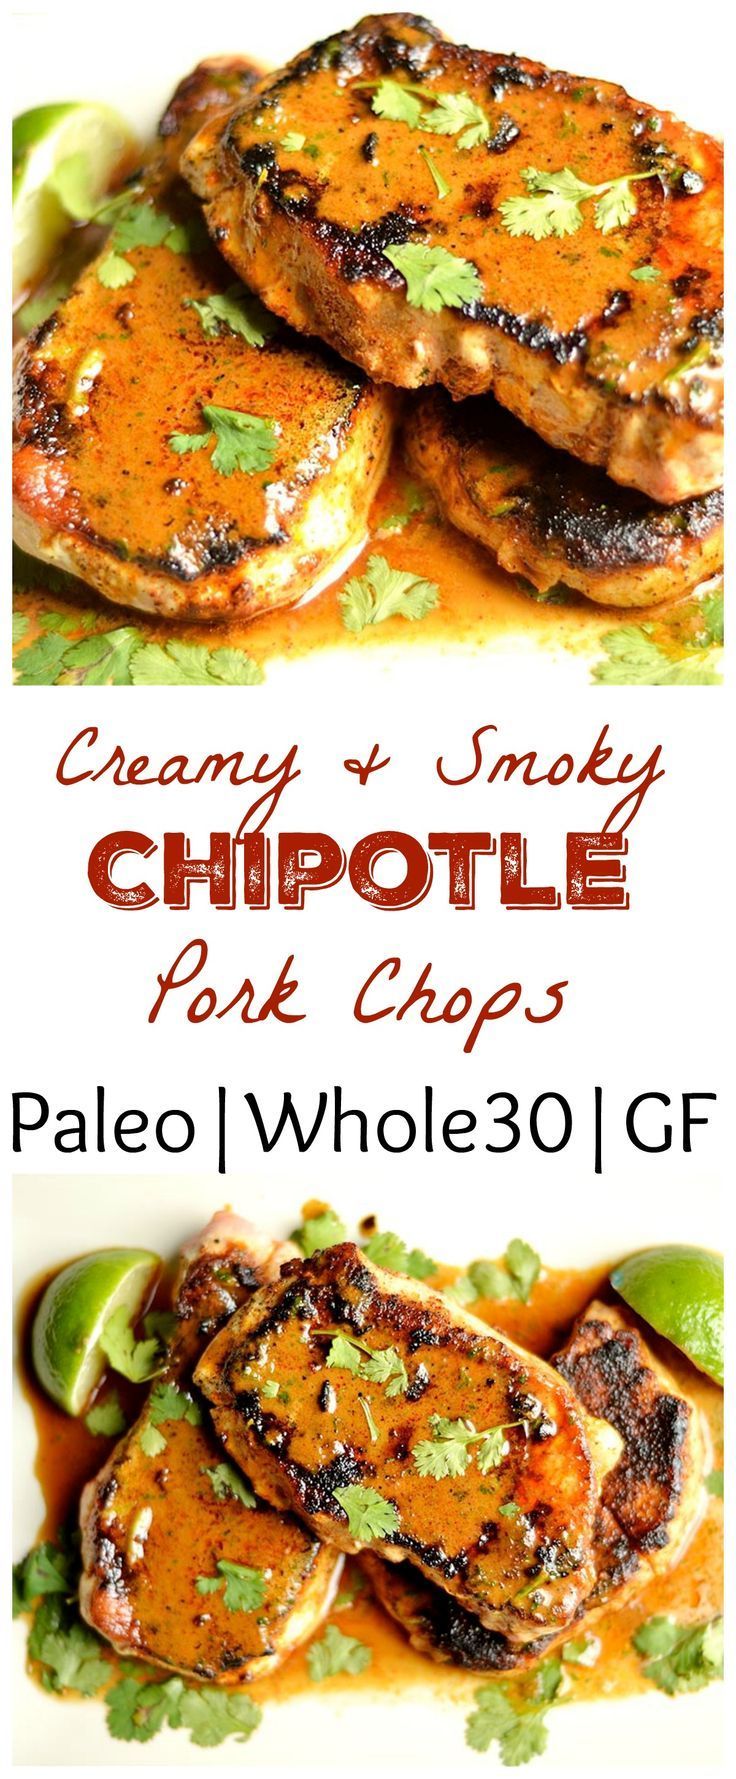 The pork chops have the most delicious creamy chipotle sauce that is dairy-free and packed with flavor!! Paleo & Whole 30